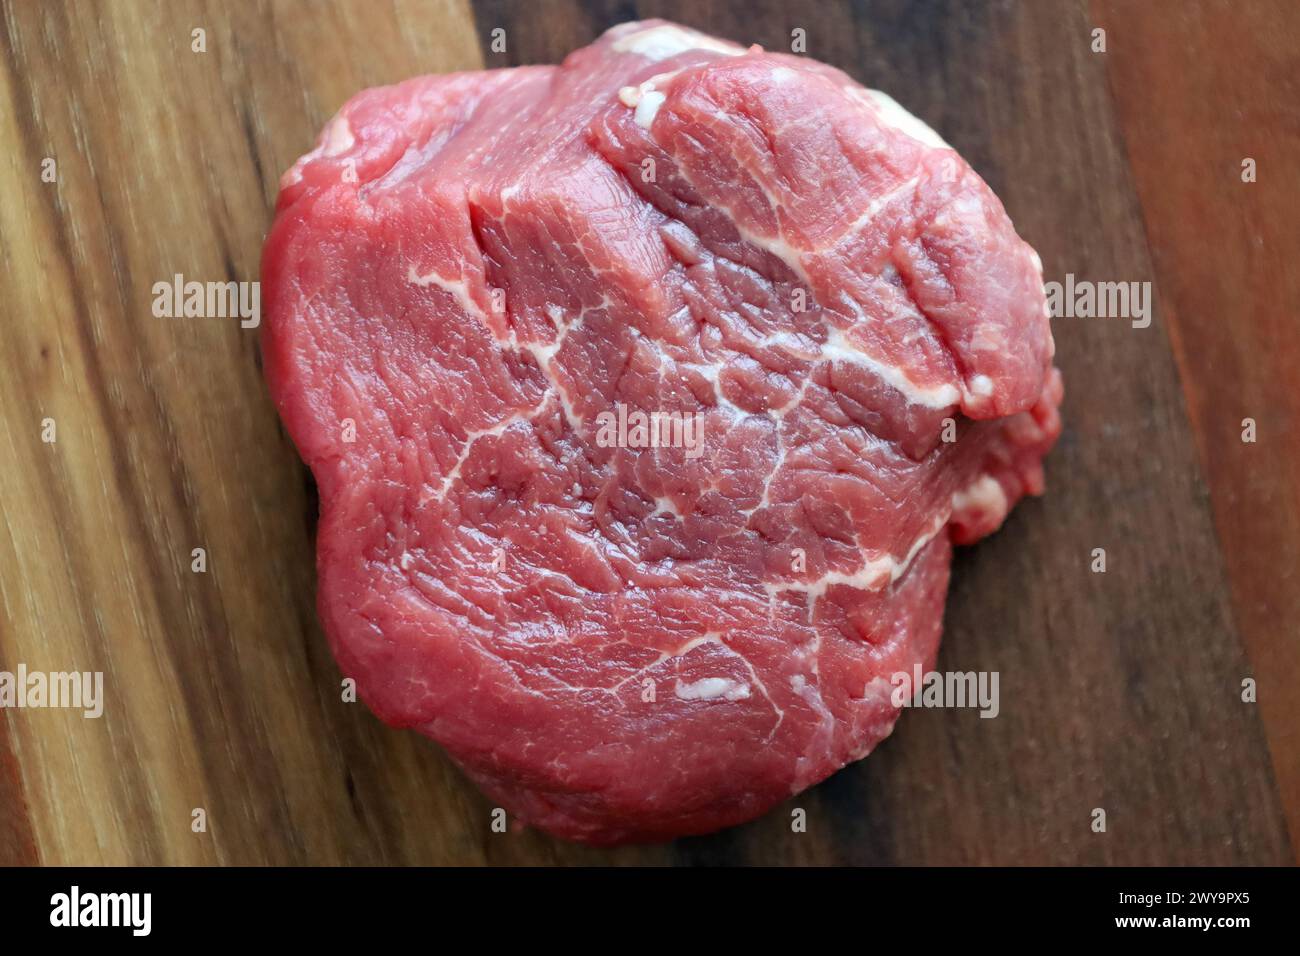 Prime filet mignon on a wooden board, ready for seasoning Stock Photo